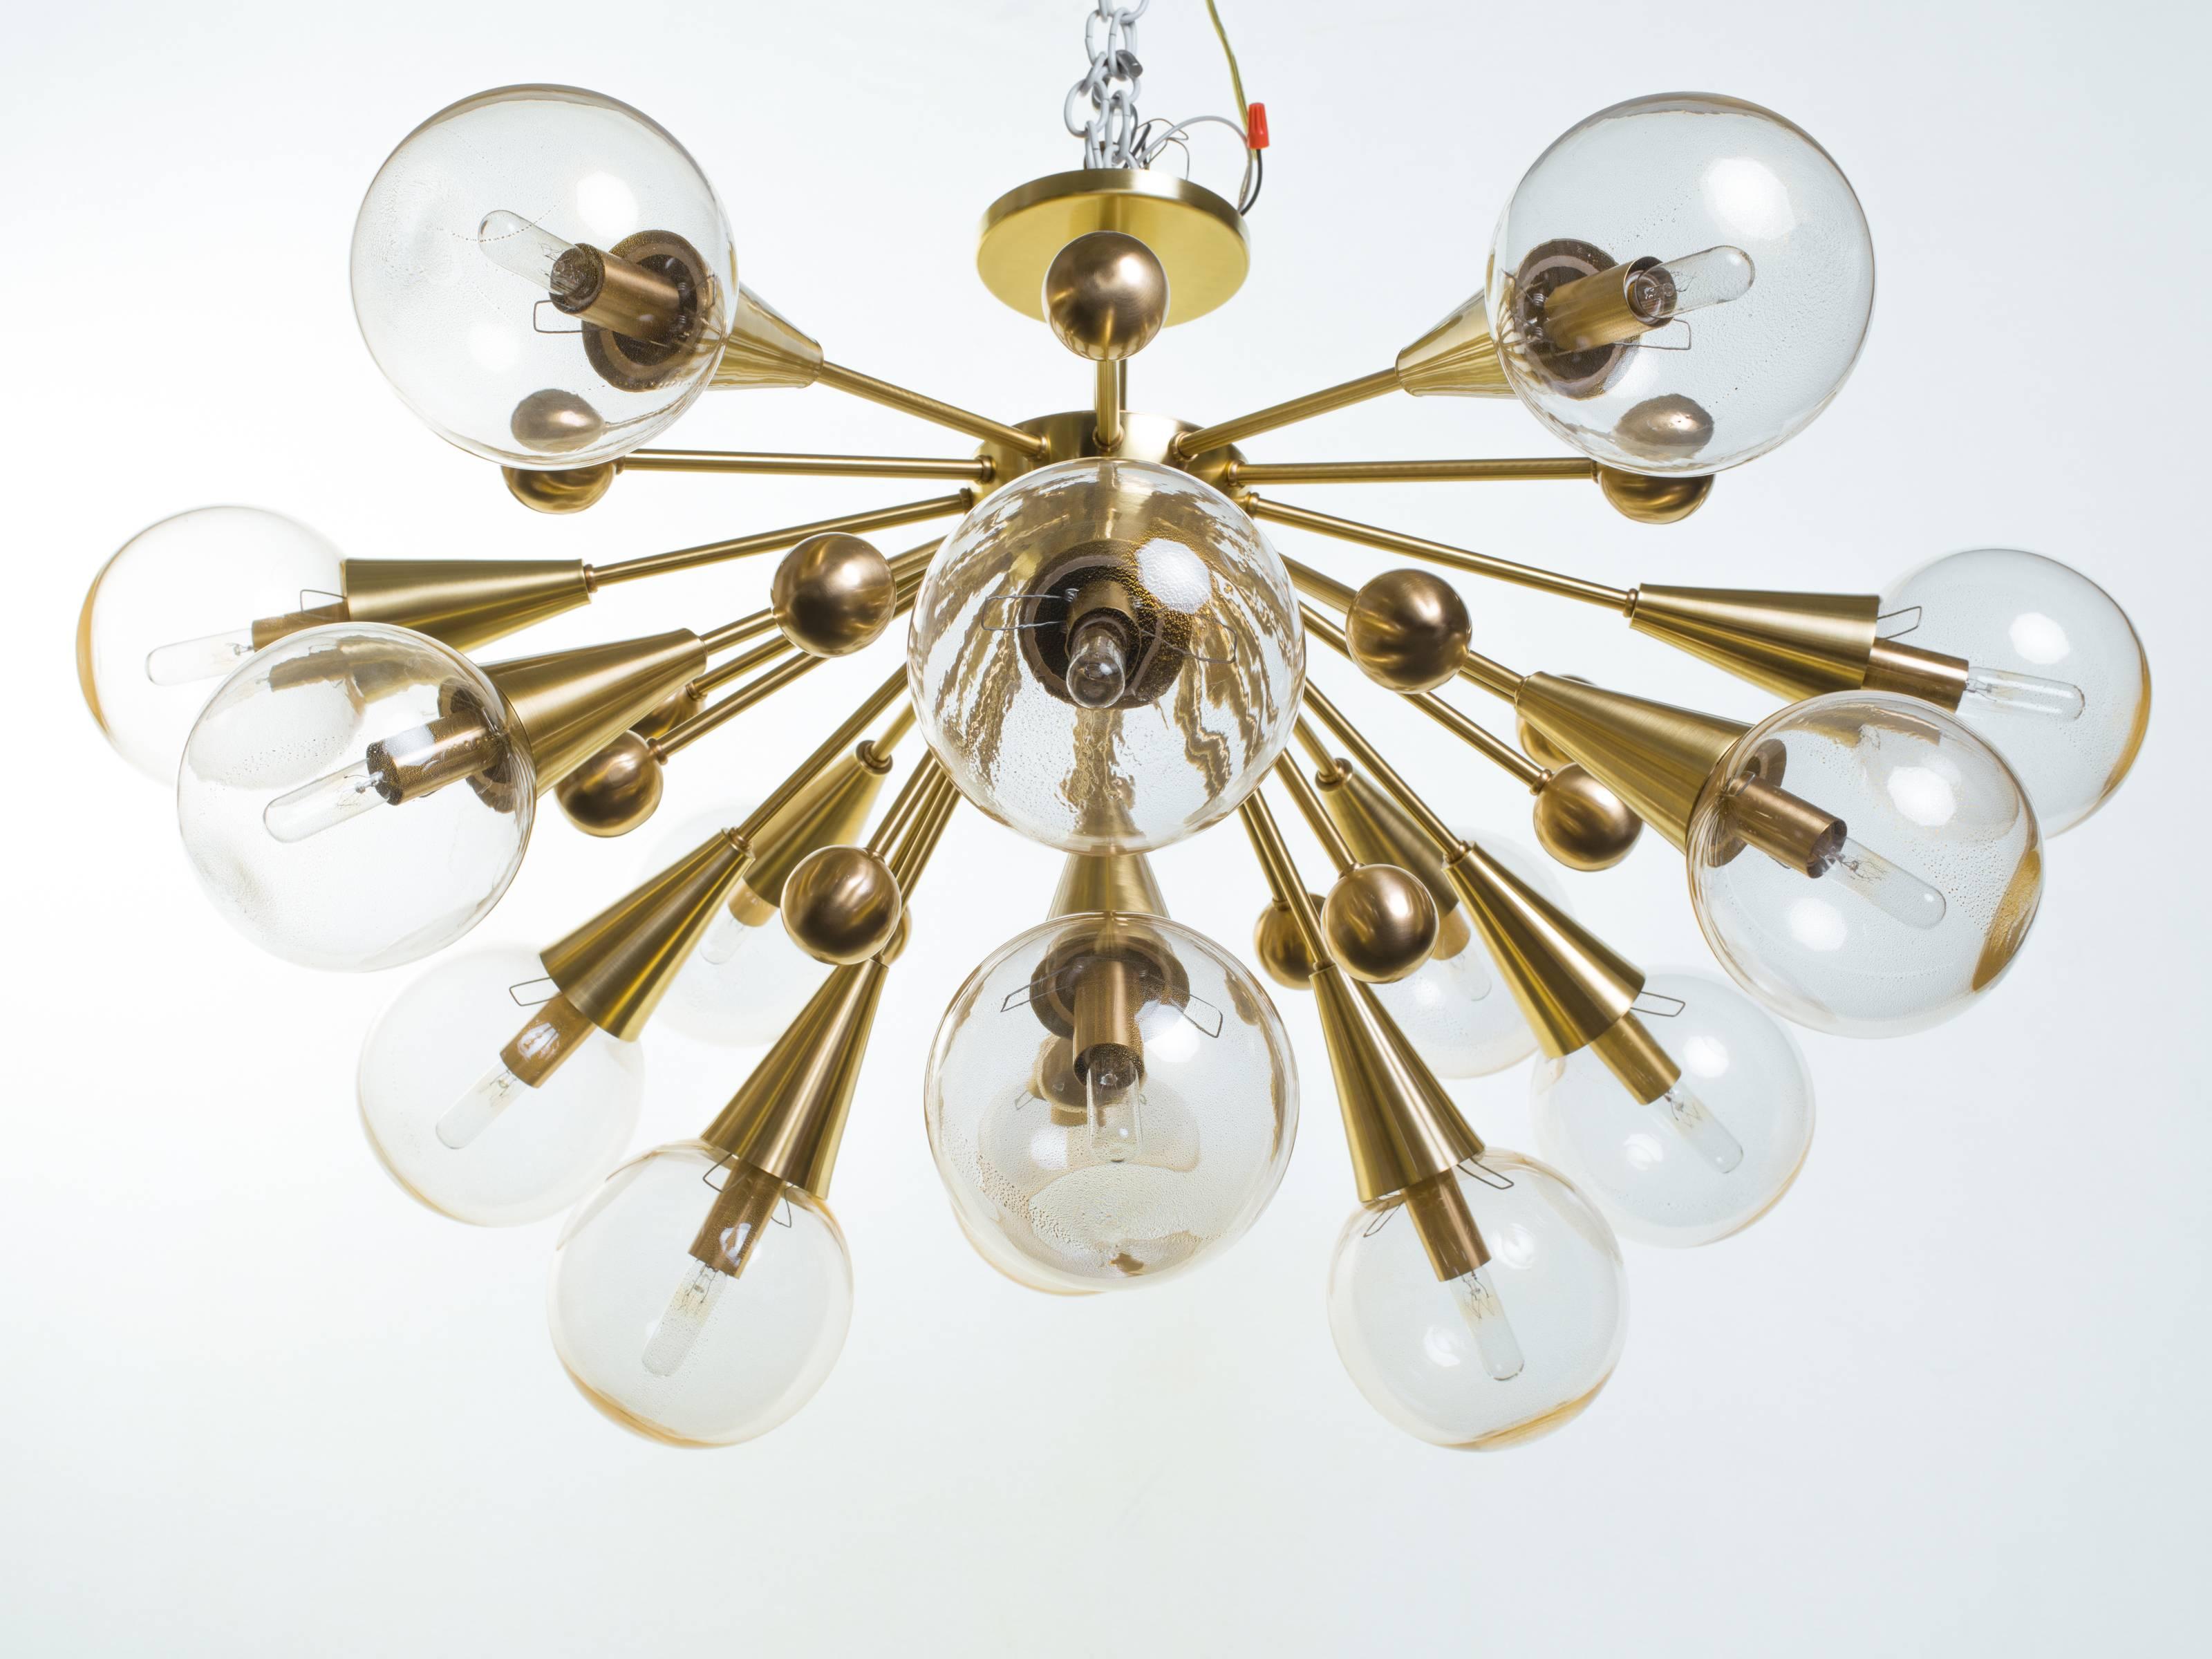 Sputnik chandelier composed of 15 lights and 16 decorative brass spheres produced by Spark Interior.
Glass globes with 24-karat gold flecks.
Made to order and available in different finishes.